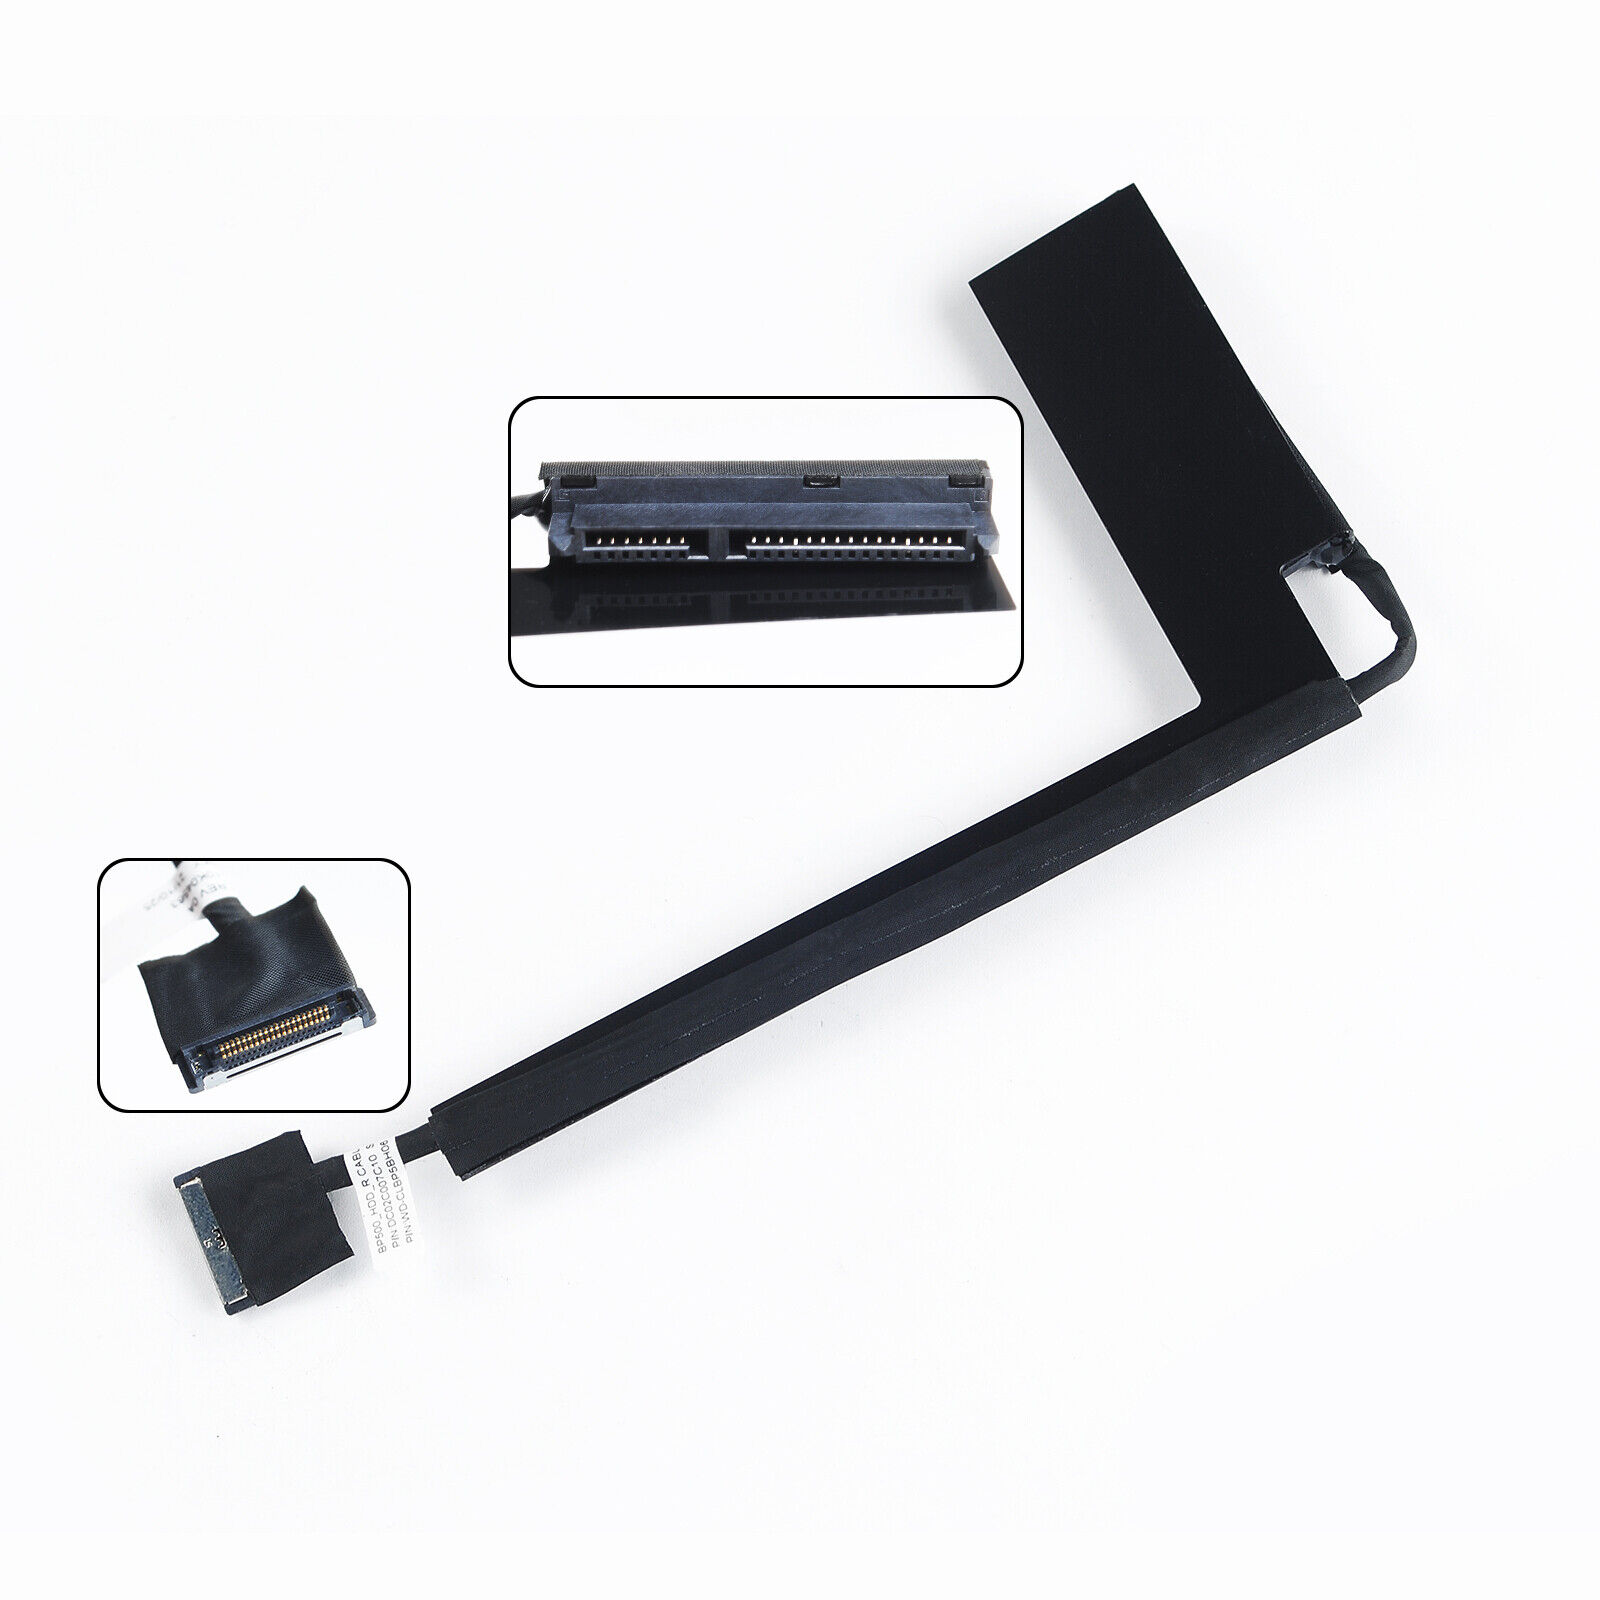 SSD HDD Hard Drive Disk L+R Cable Caddy Tray Frame for Lenovo ThinkPad P50 P51